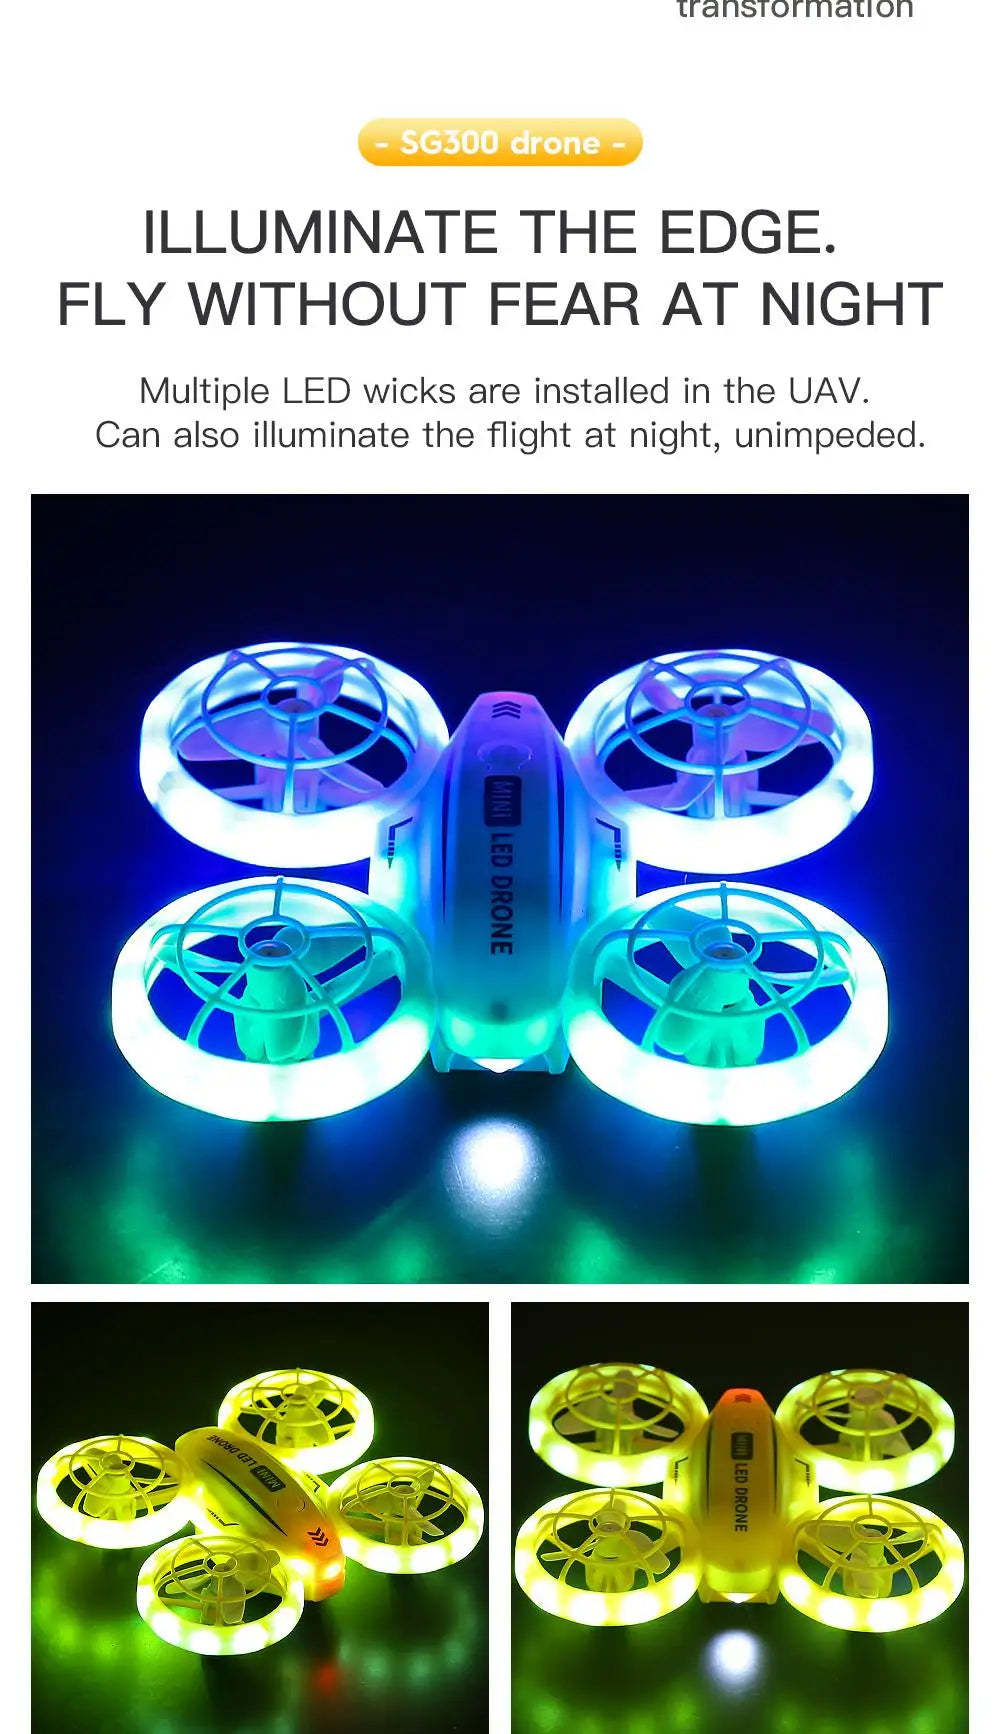 can also illuminate the flight at night, unimpeded: 3 8